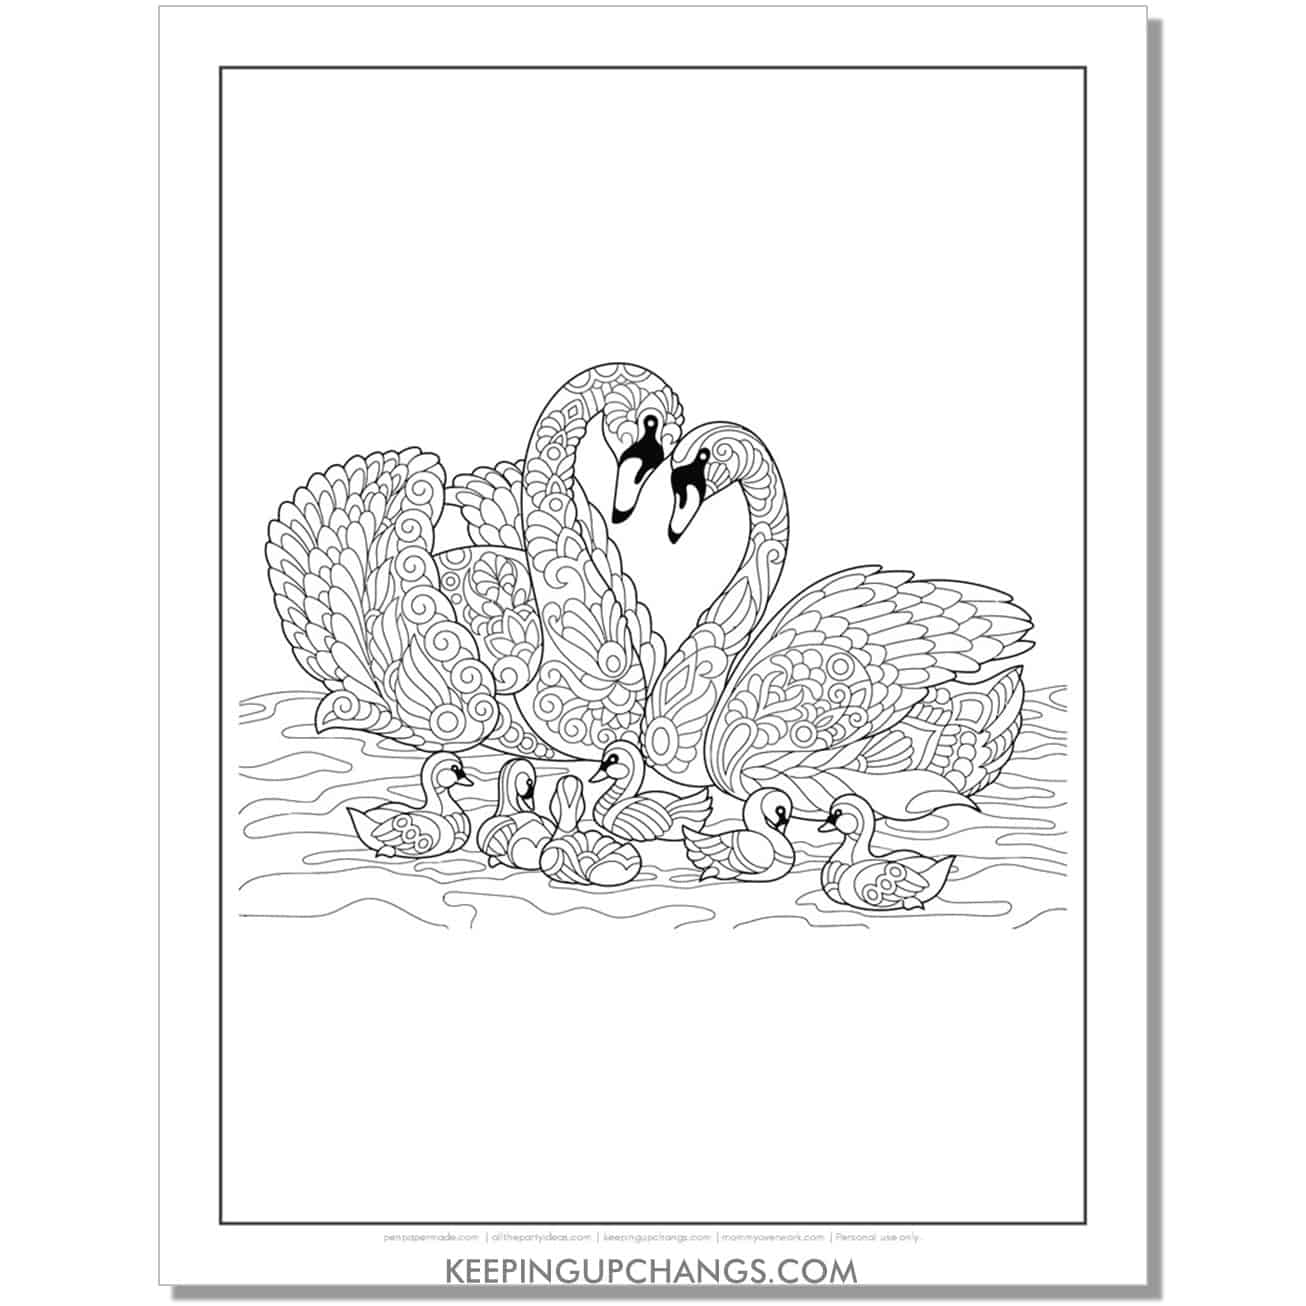 swan couple with family of baby swans coloring page.